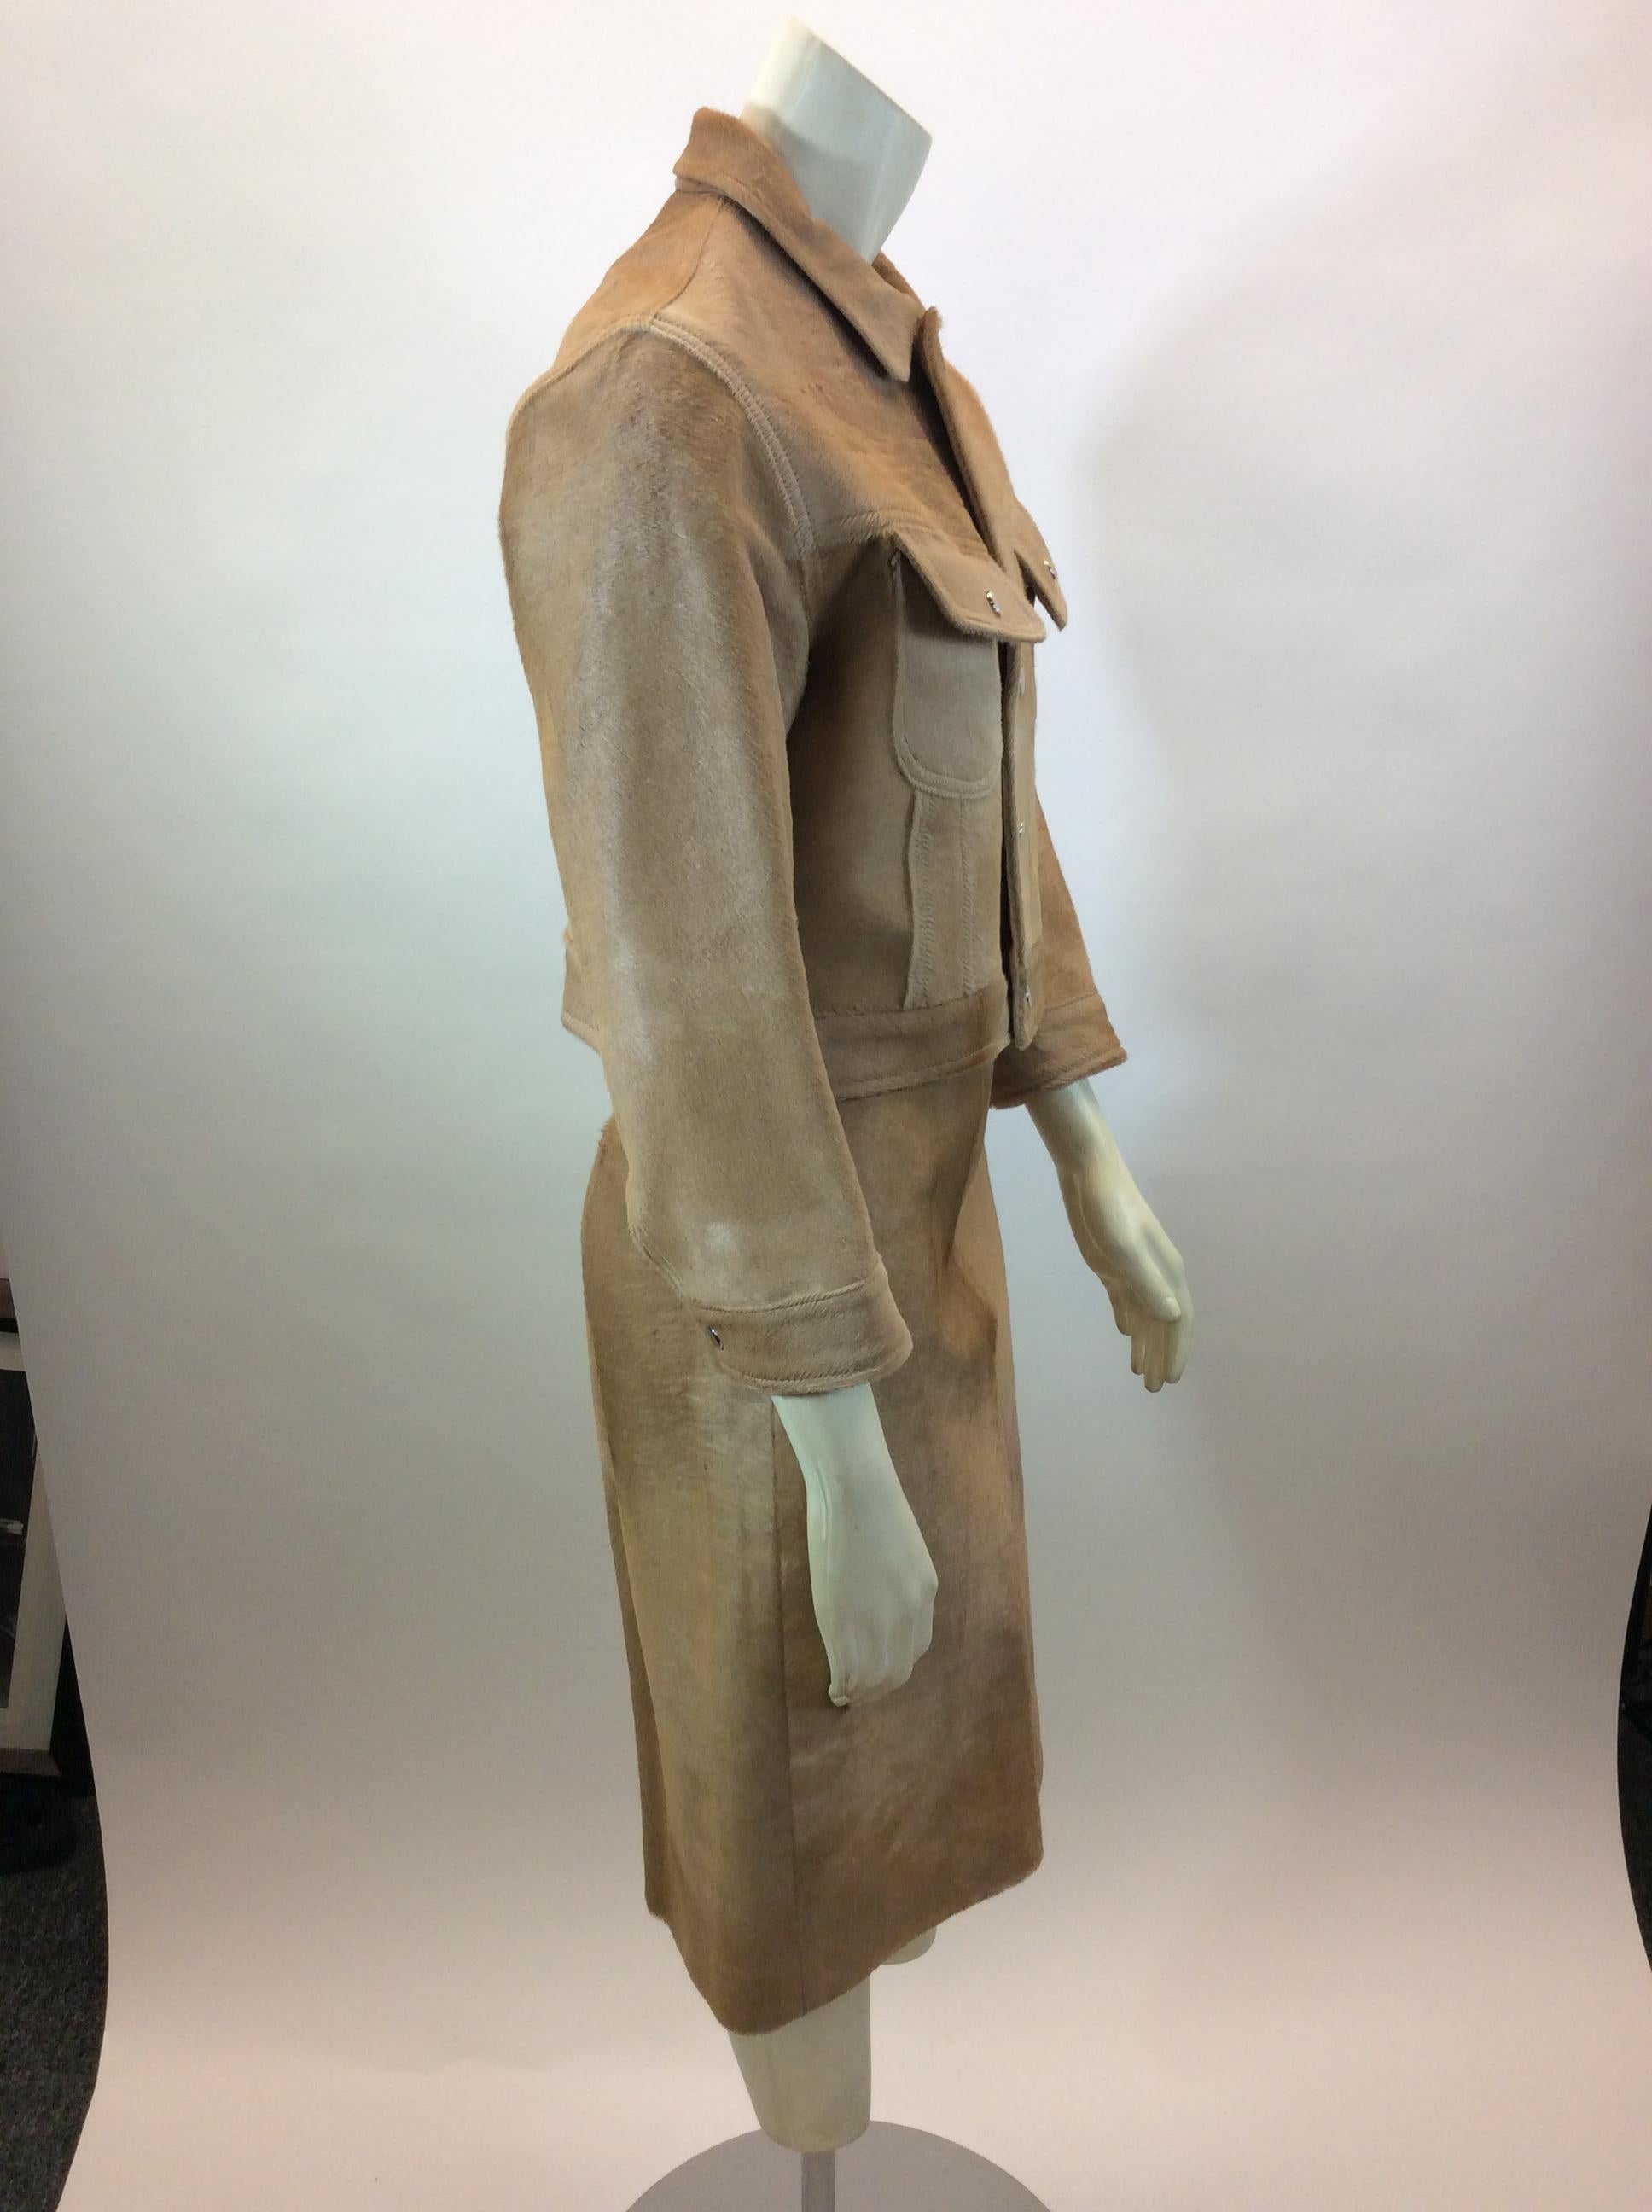 Ralph Lauren Black Label Tan Pony Hair Three Piece Skirt Suit In Good Condition For Sale In Narberth, PA